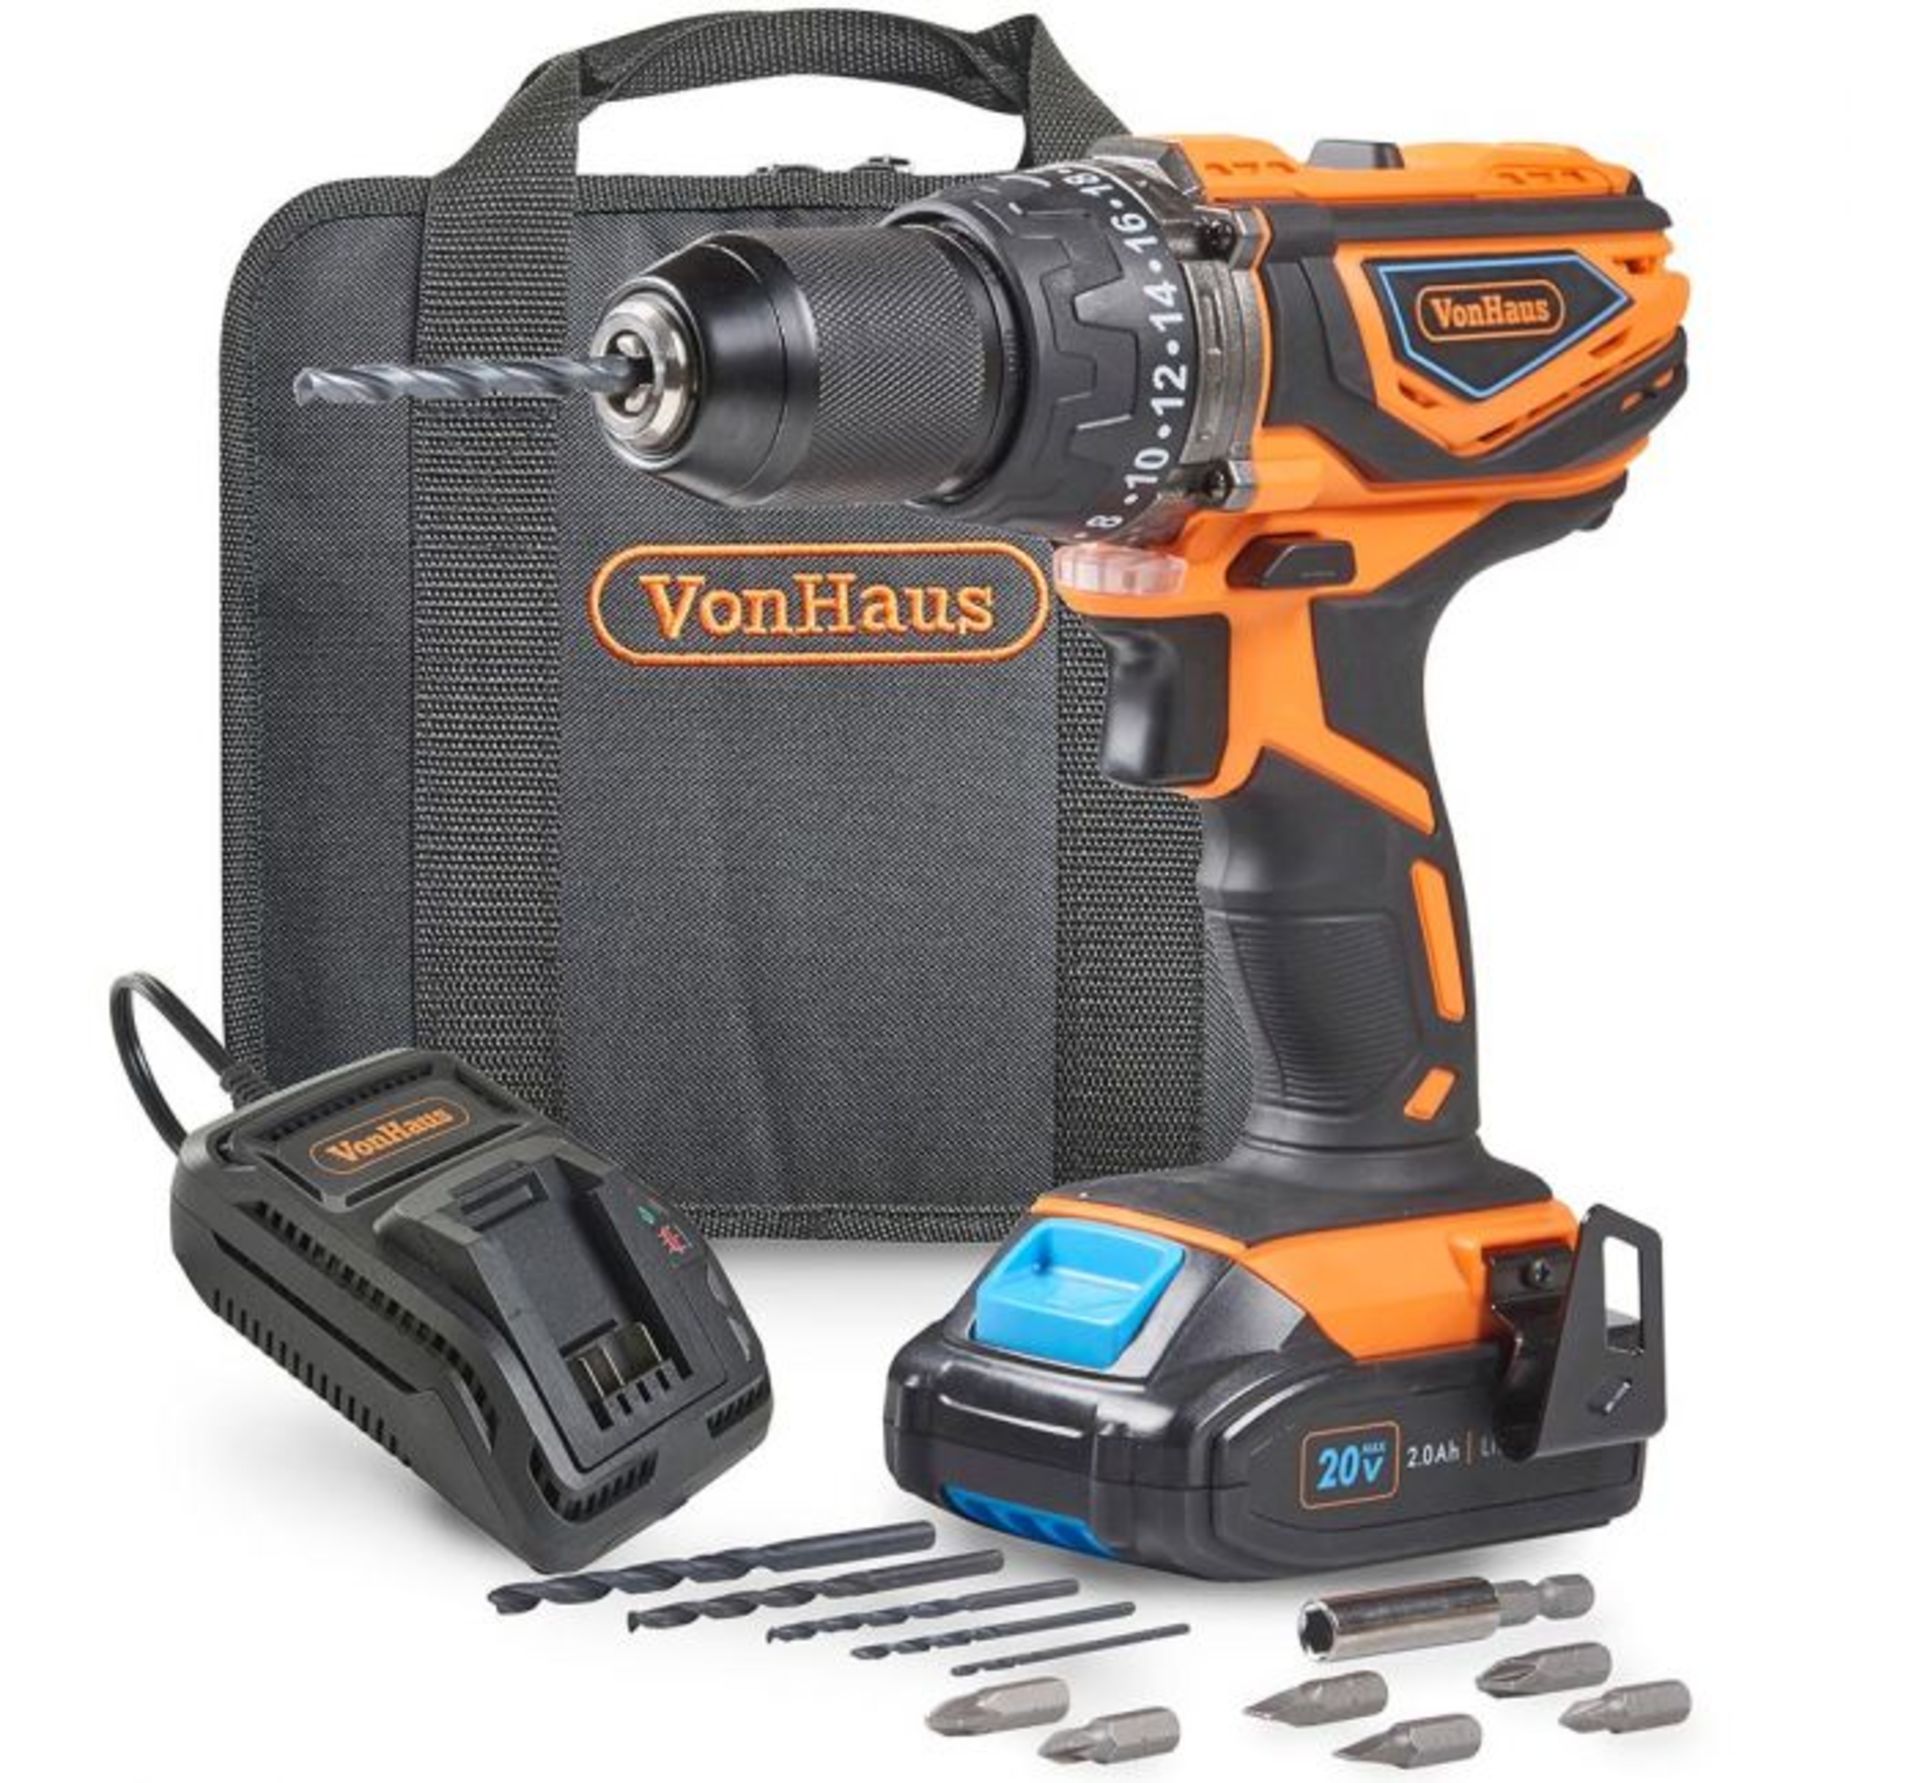 (DD33) 20V MAX Cordless Impact Combi Drill 20V Max 2Ah battery included is compatible with oth...